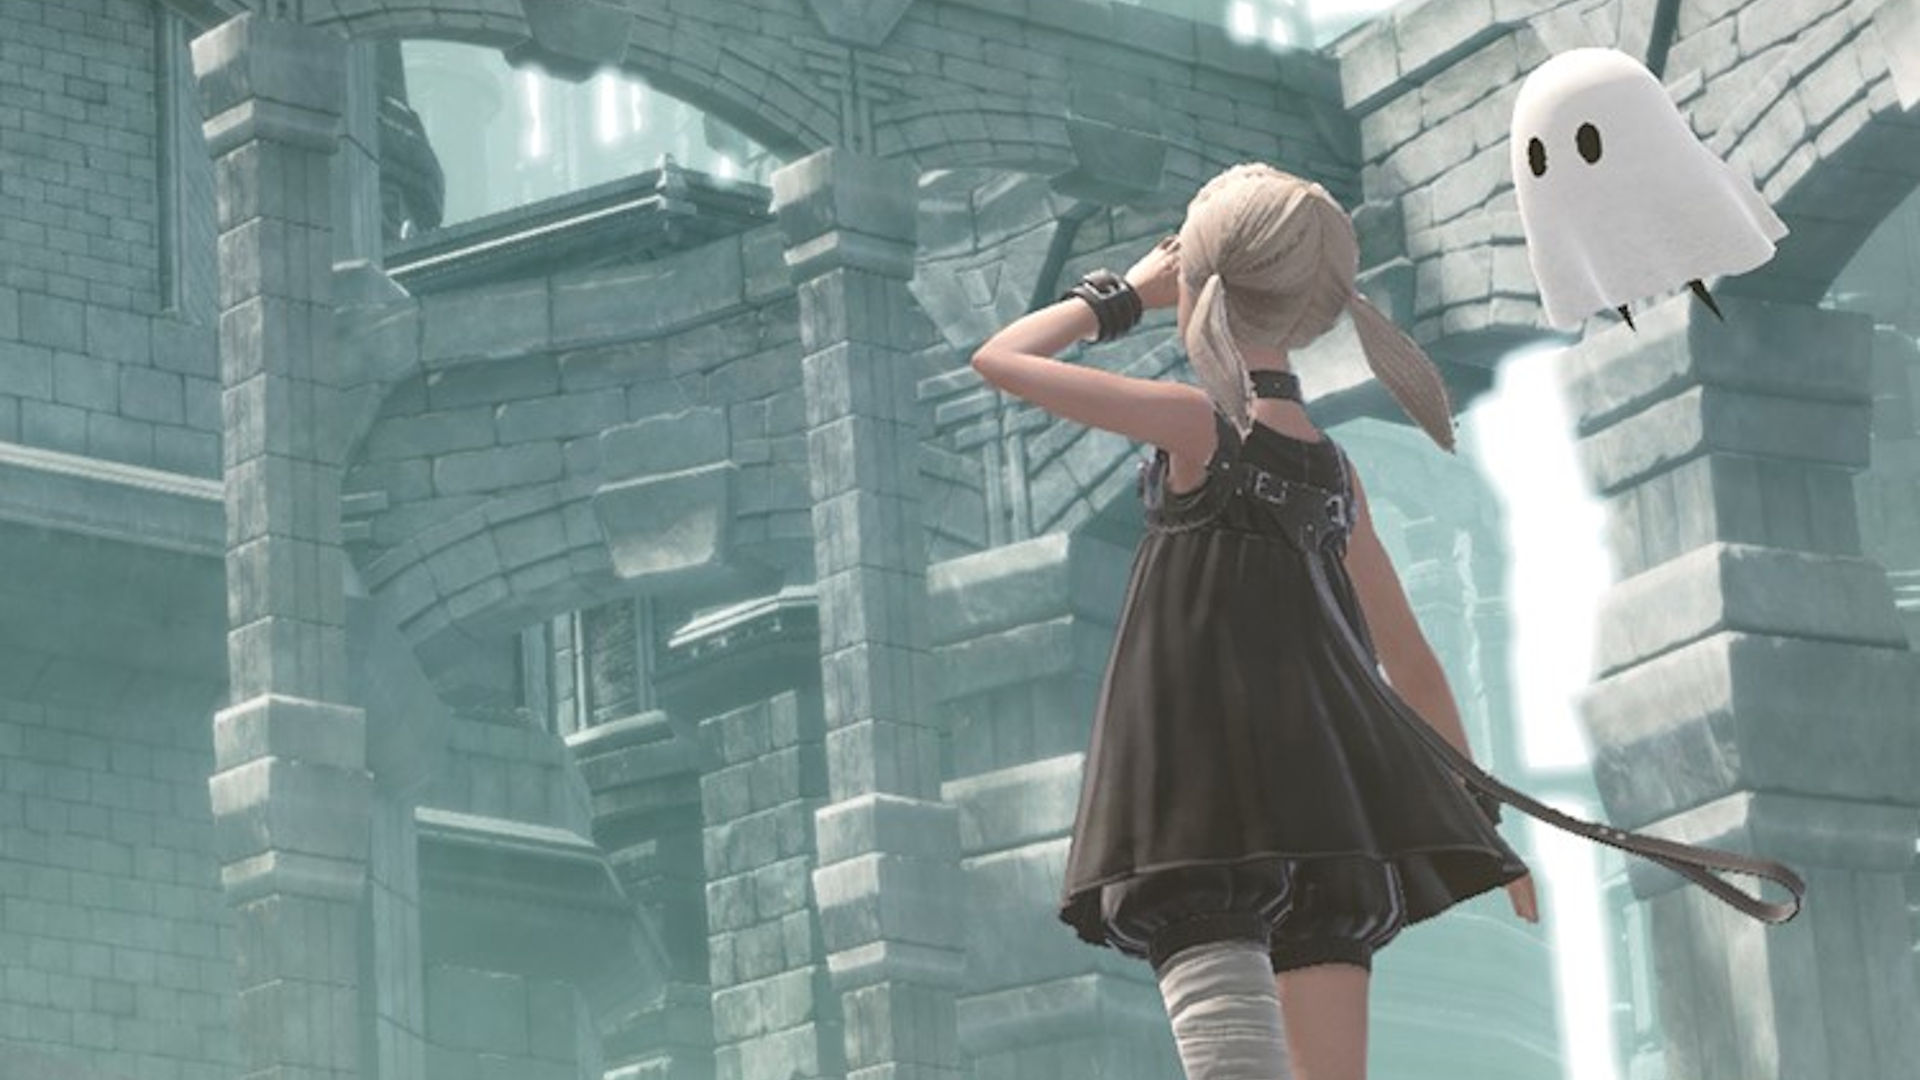 Nier Reincarnation: Gameplay, release date, and everything you need to know